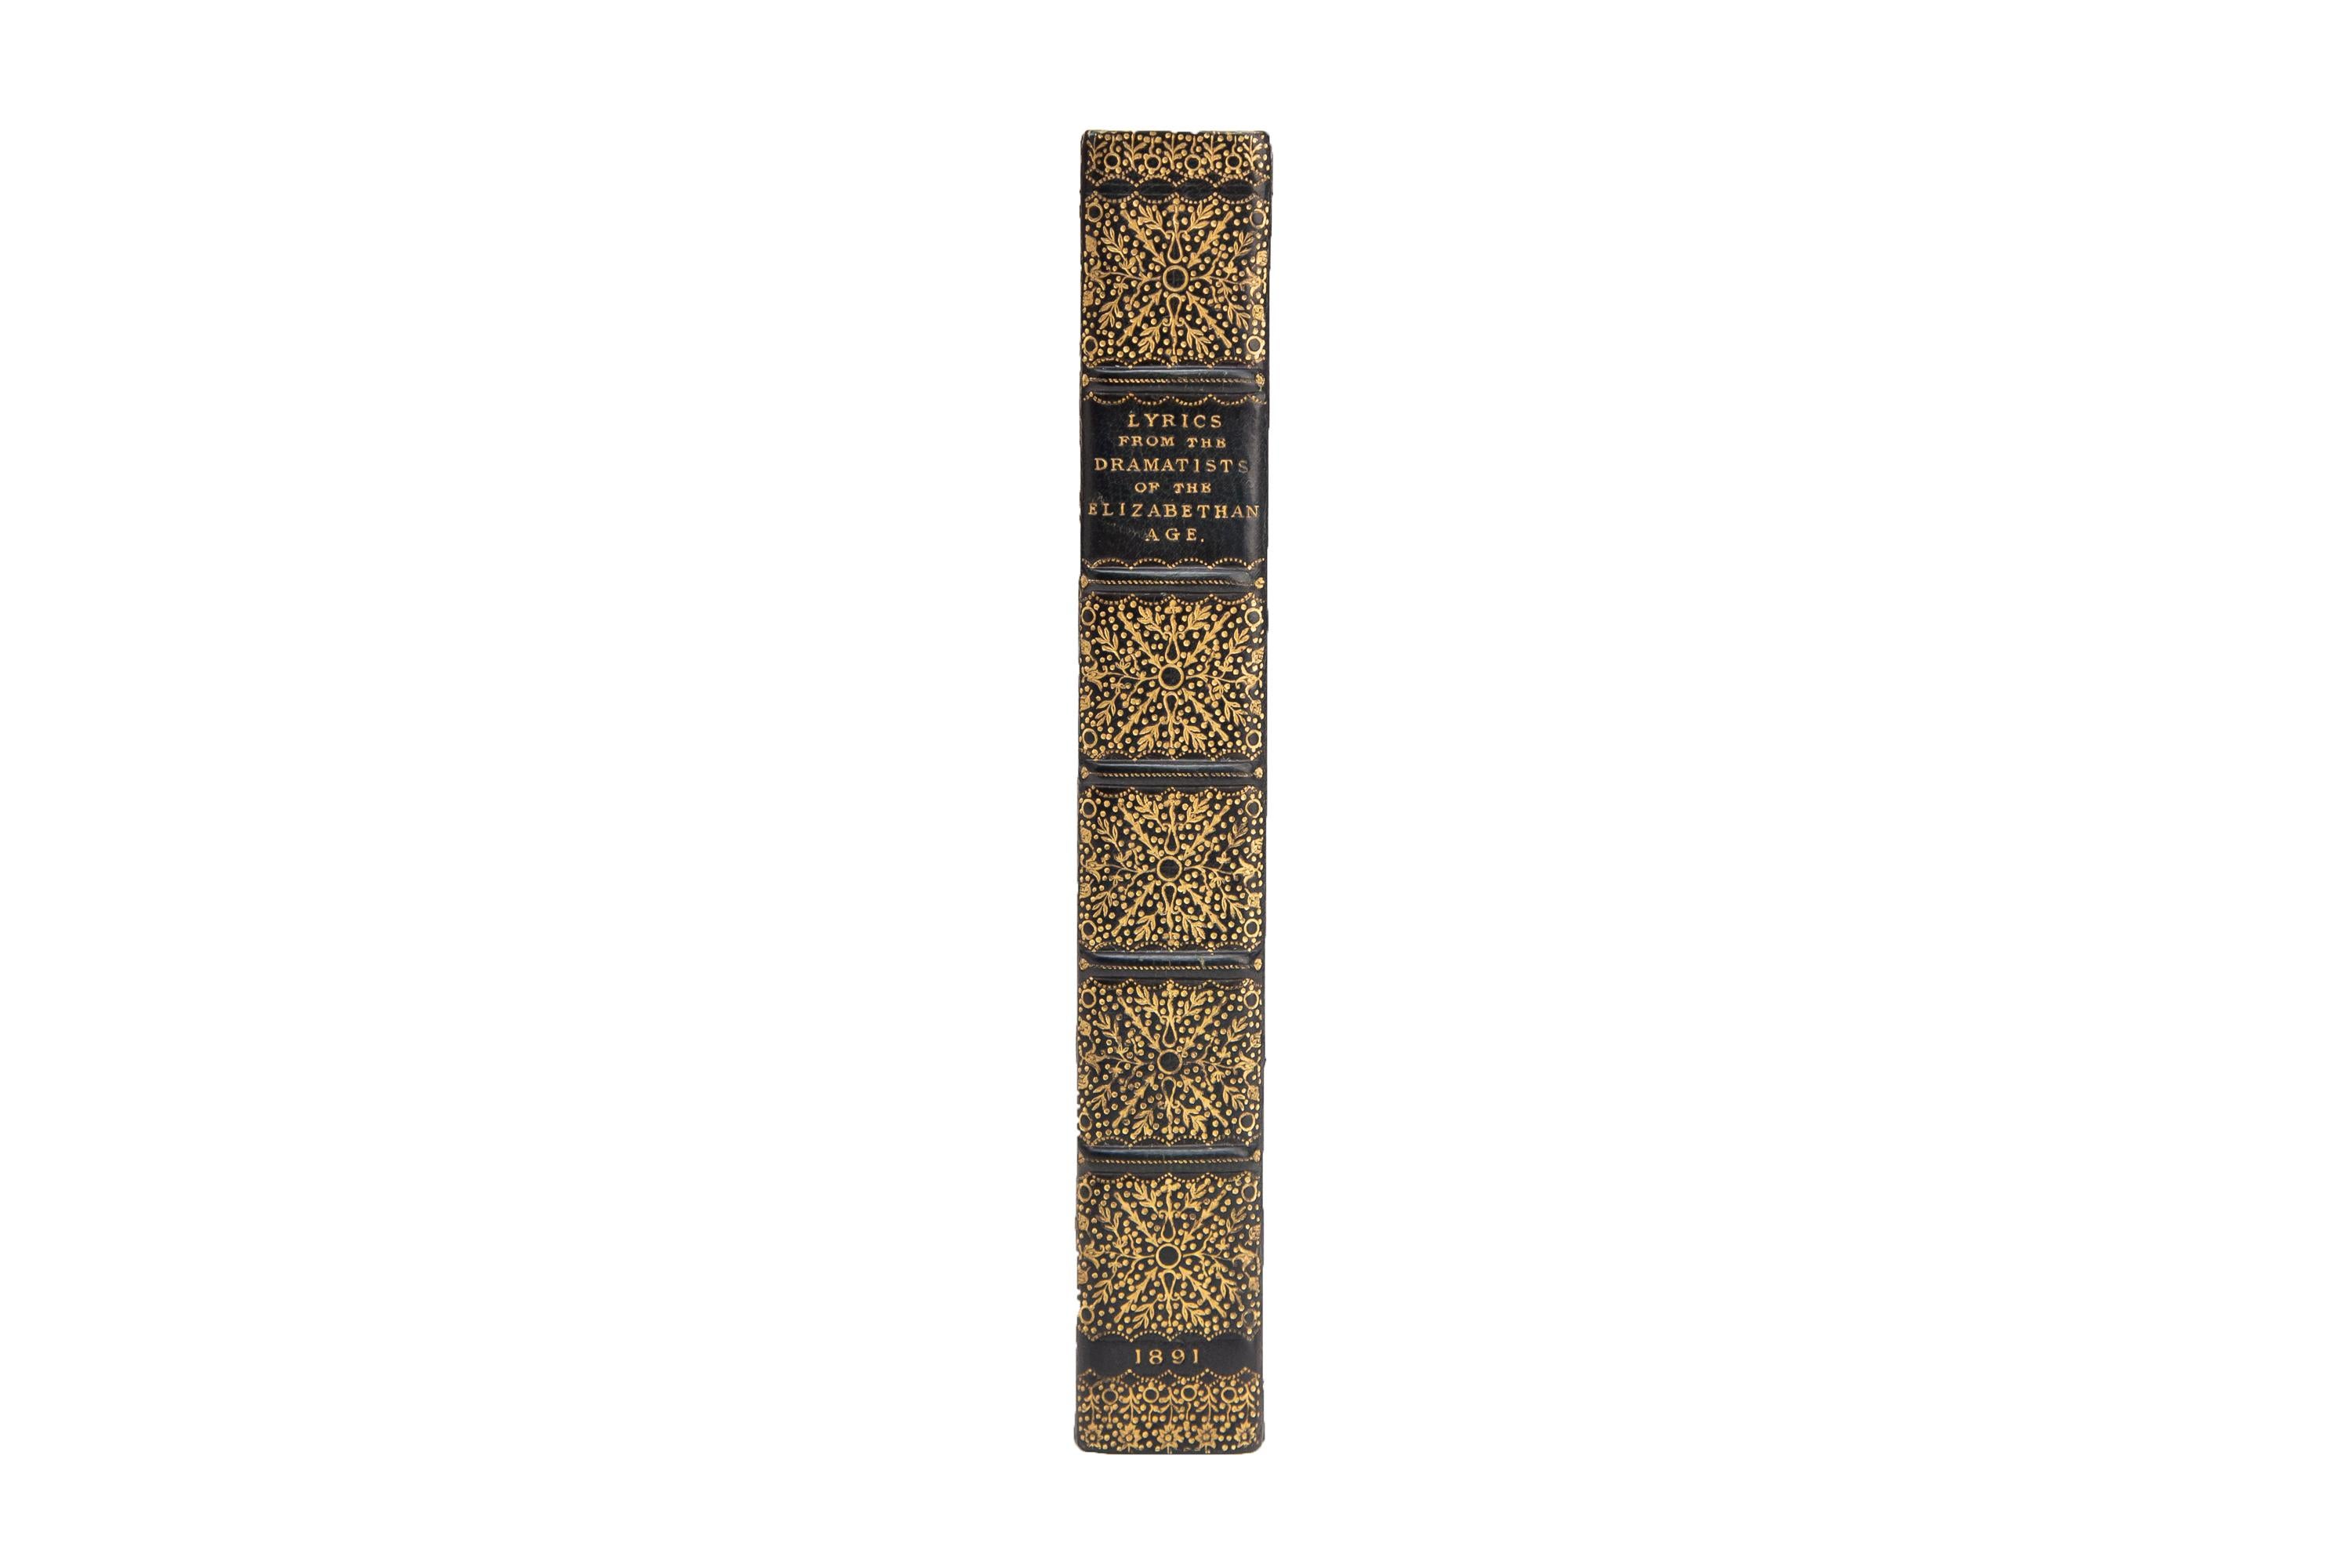 1 Volume. A.H. Bullen, Lyrics from the Dramatists of the Elizabethan Age.  For Sale at 1stDibs